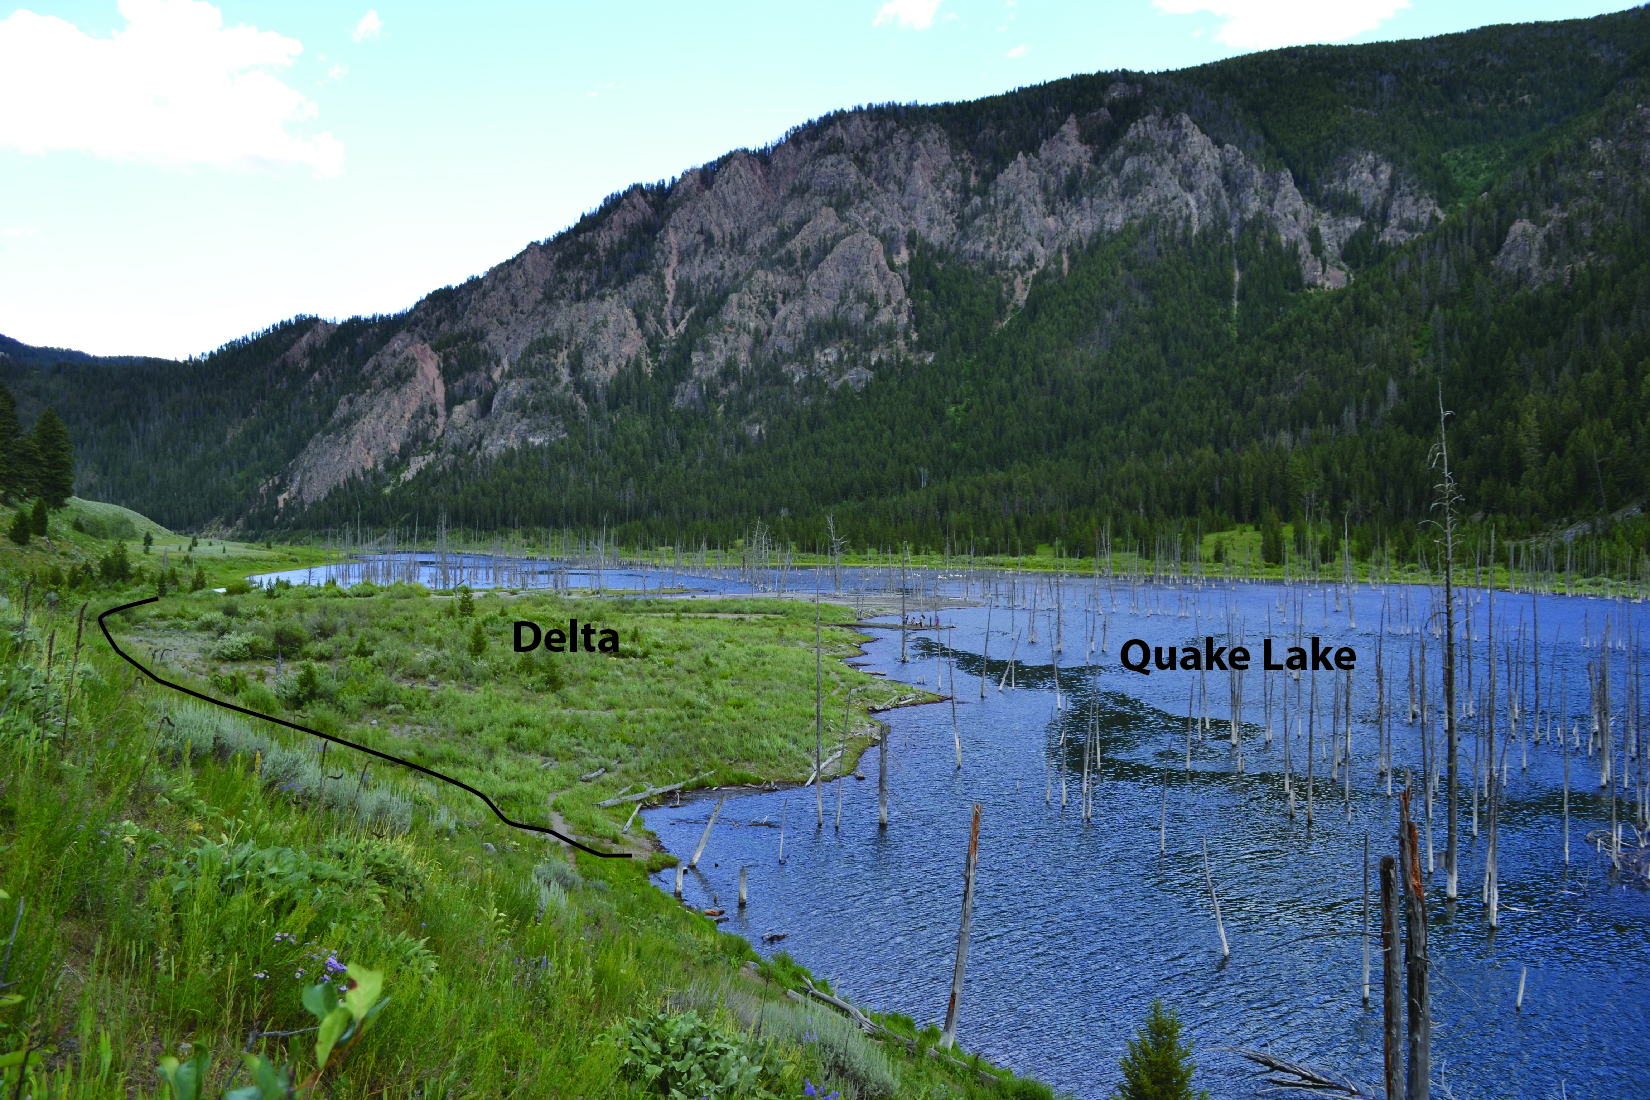 Delta in Quake Lake Montana. Deposition of this delta began in 1959, when the Madison river was dammed by the landslide caused by the 7.5 magnitude earthquake.